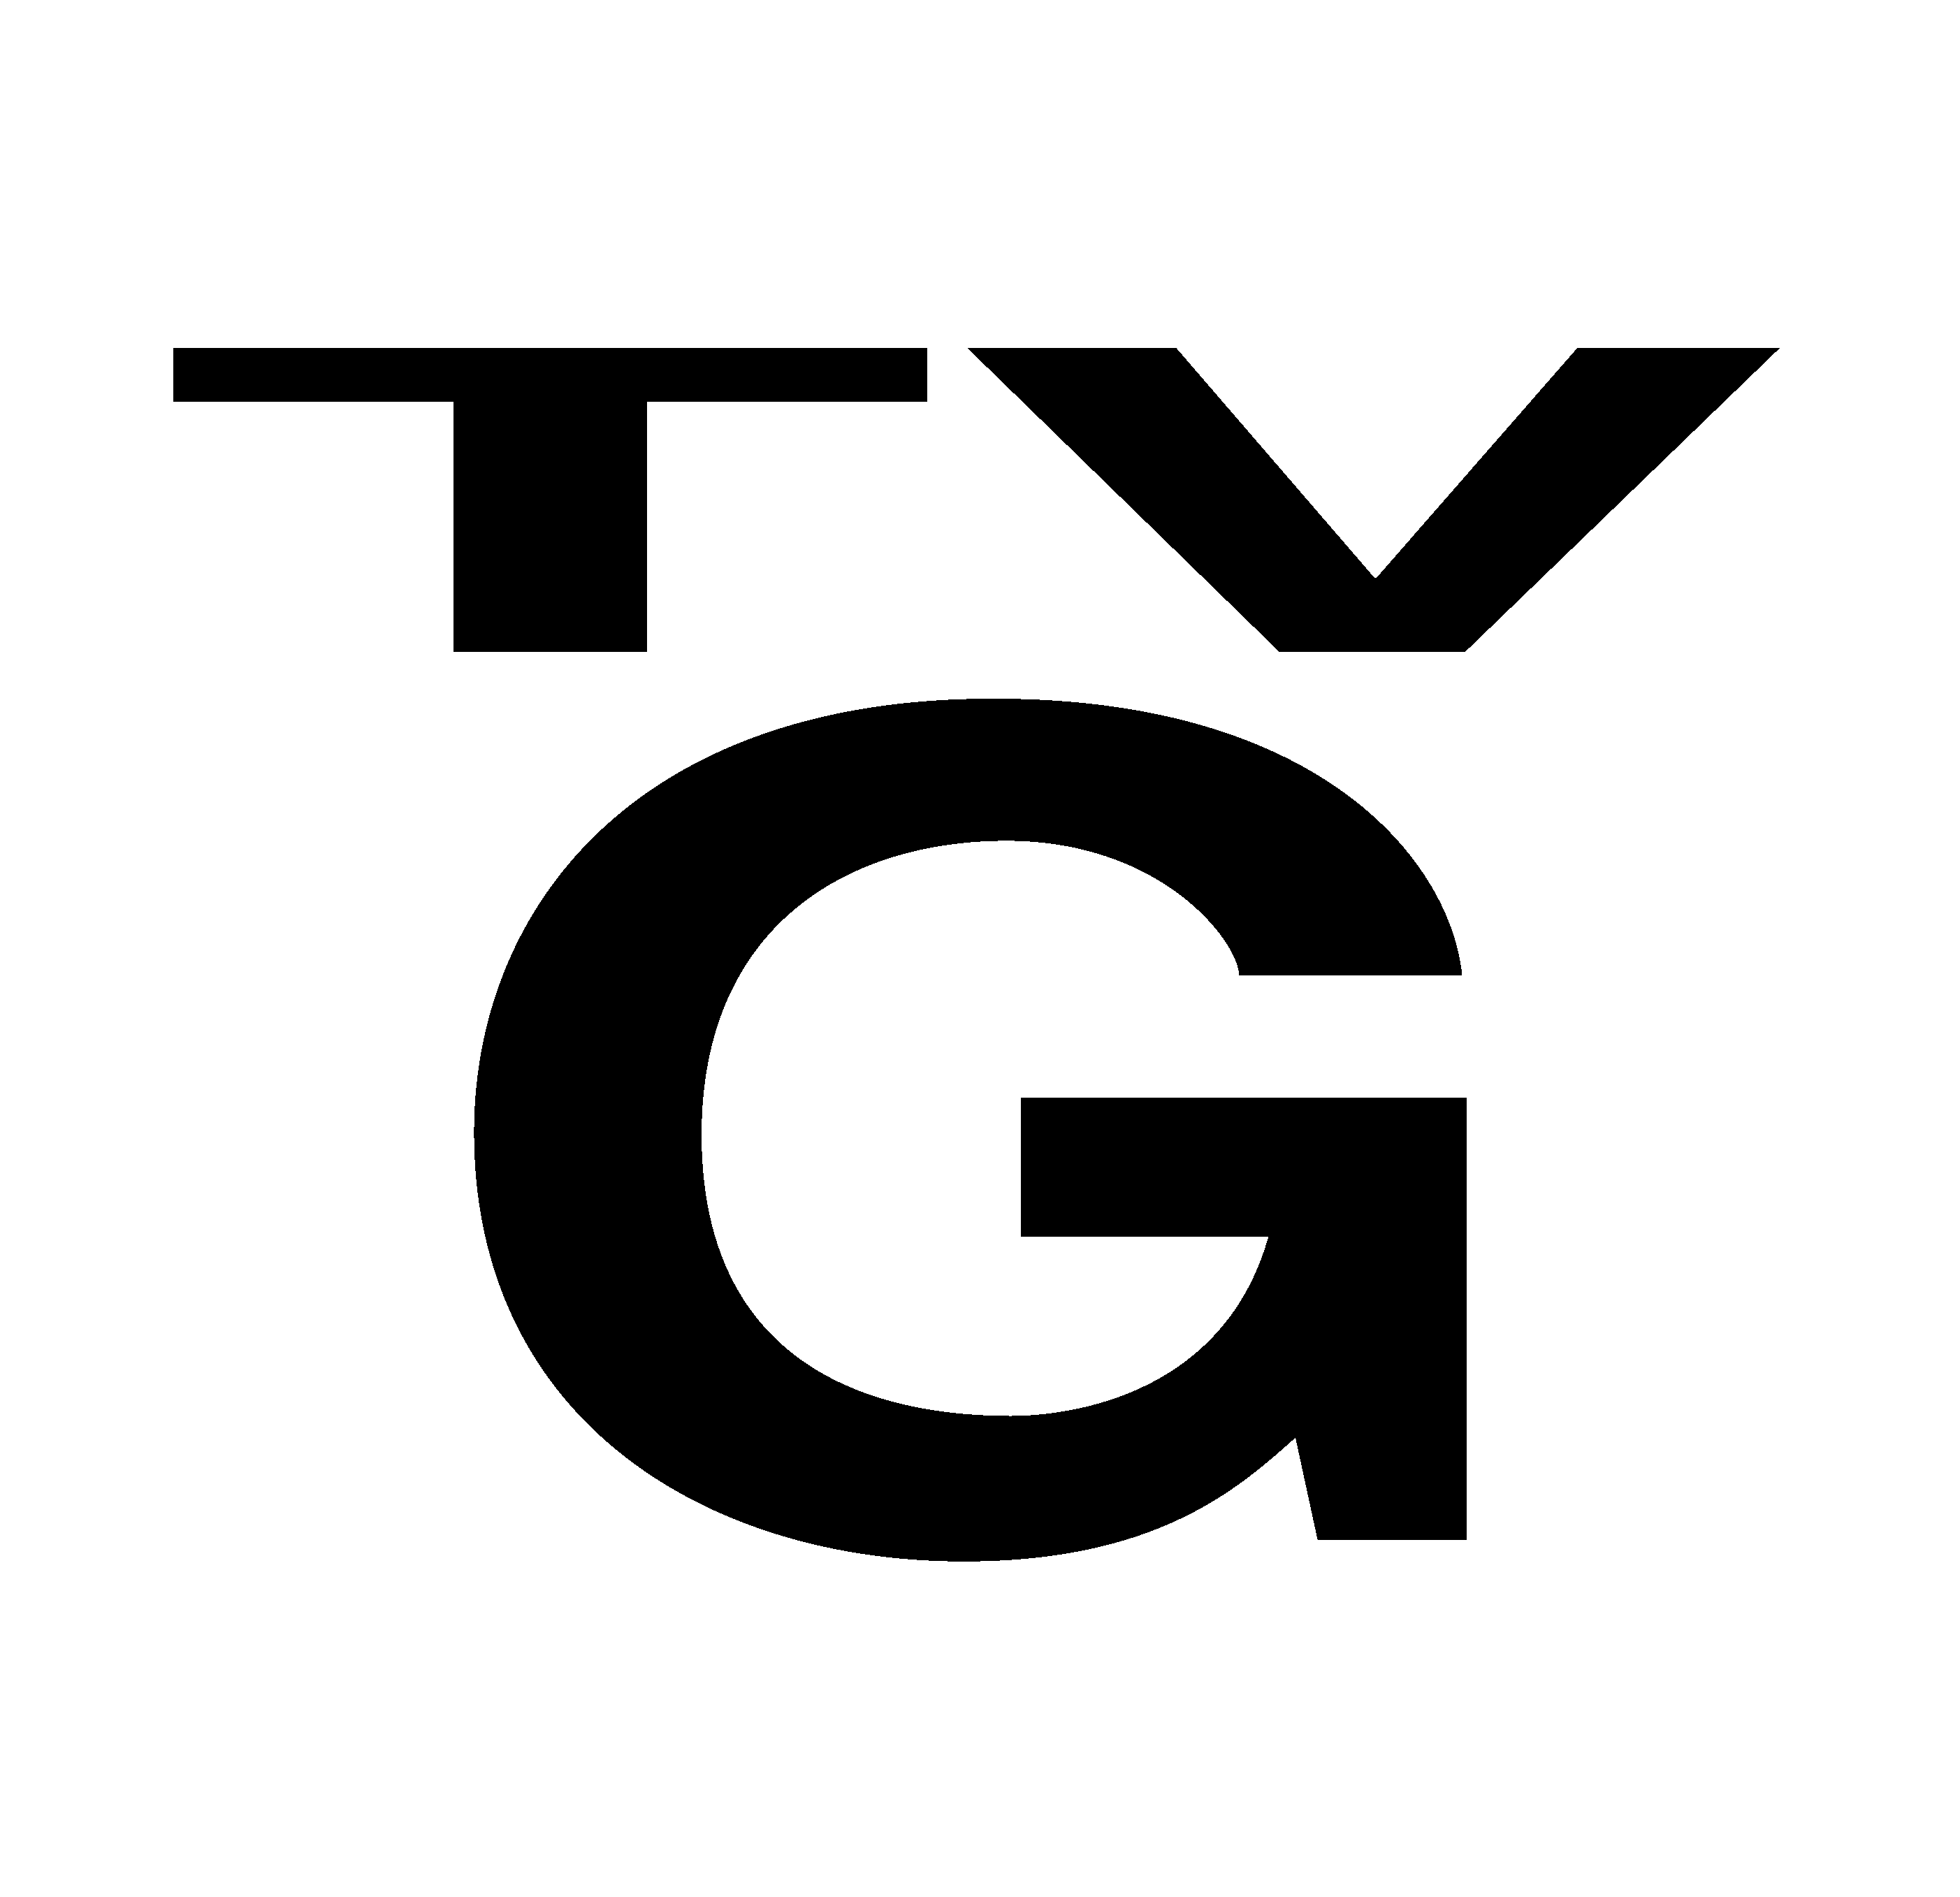 TV-Y7 Logo - File:White TV-G icon.png - Wikimedia Commons